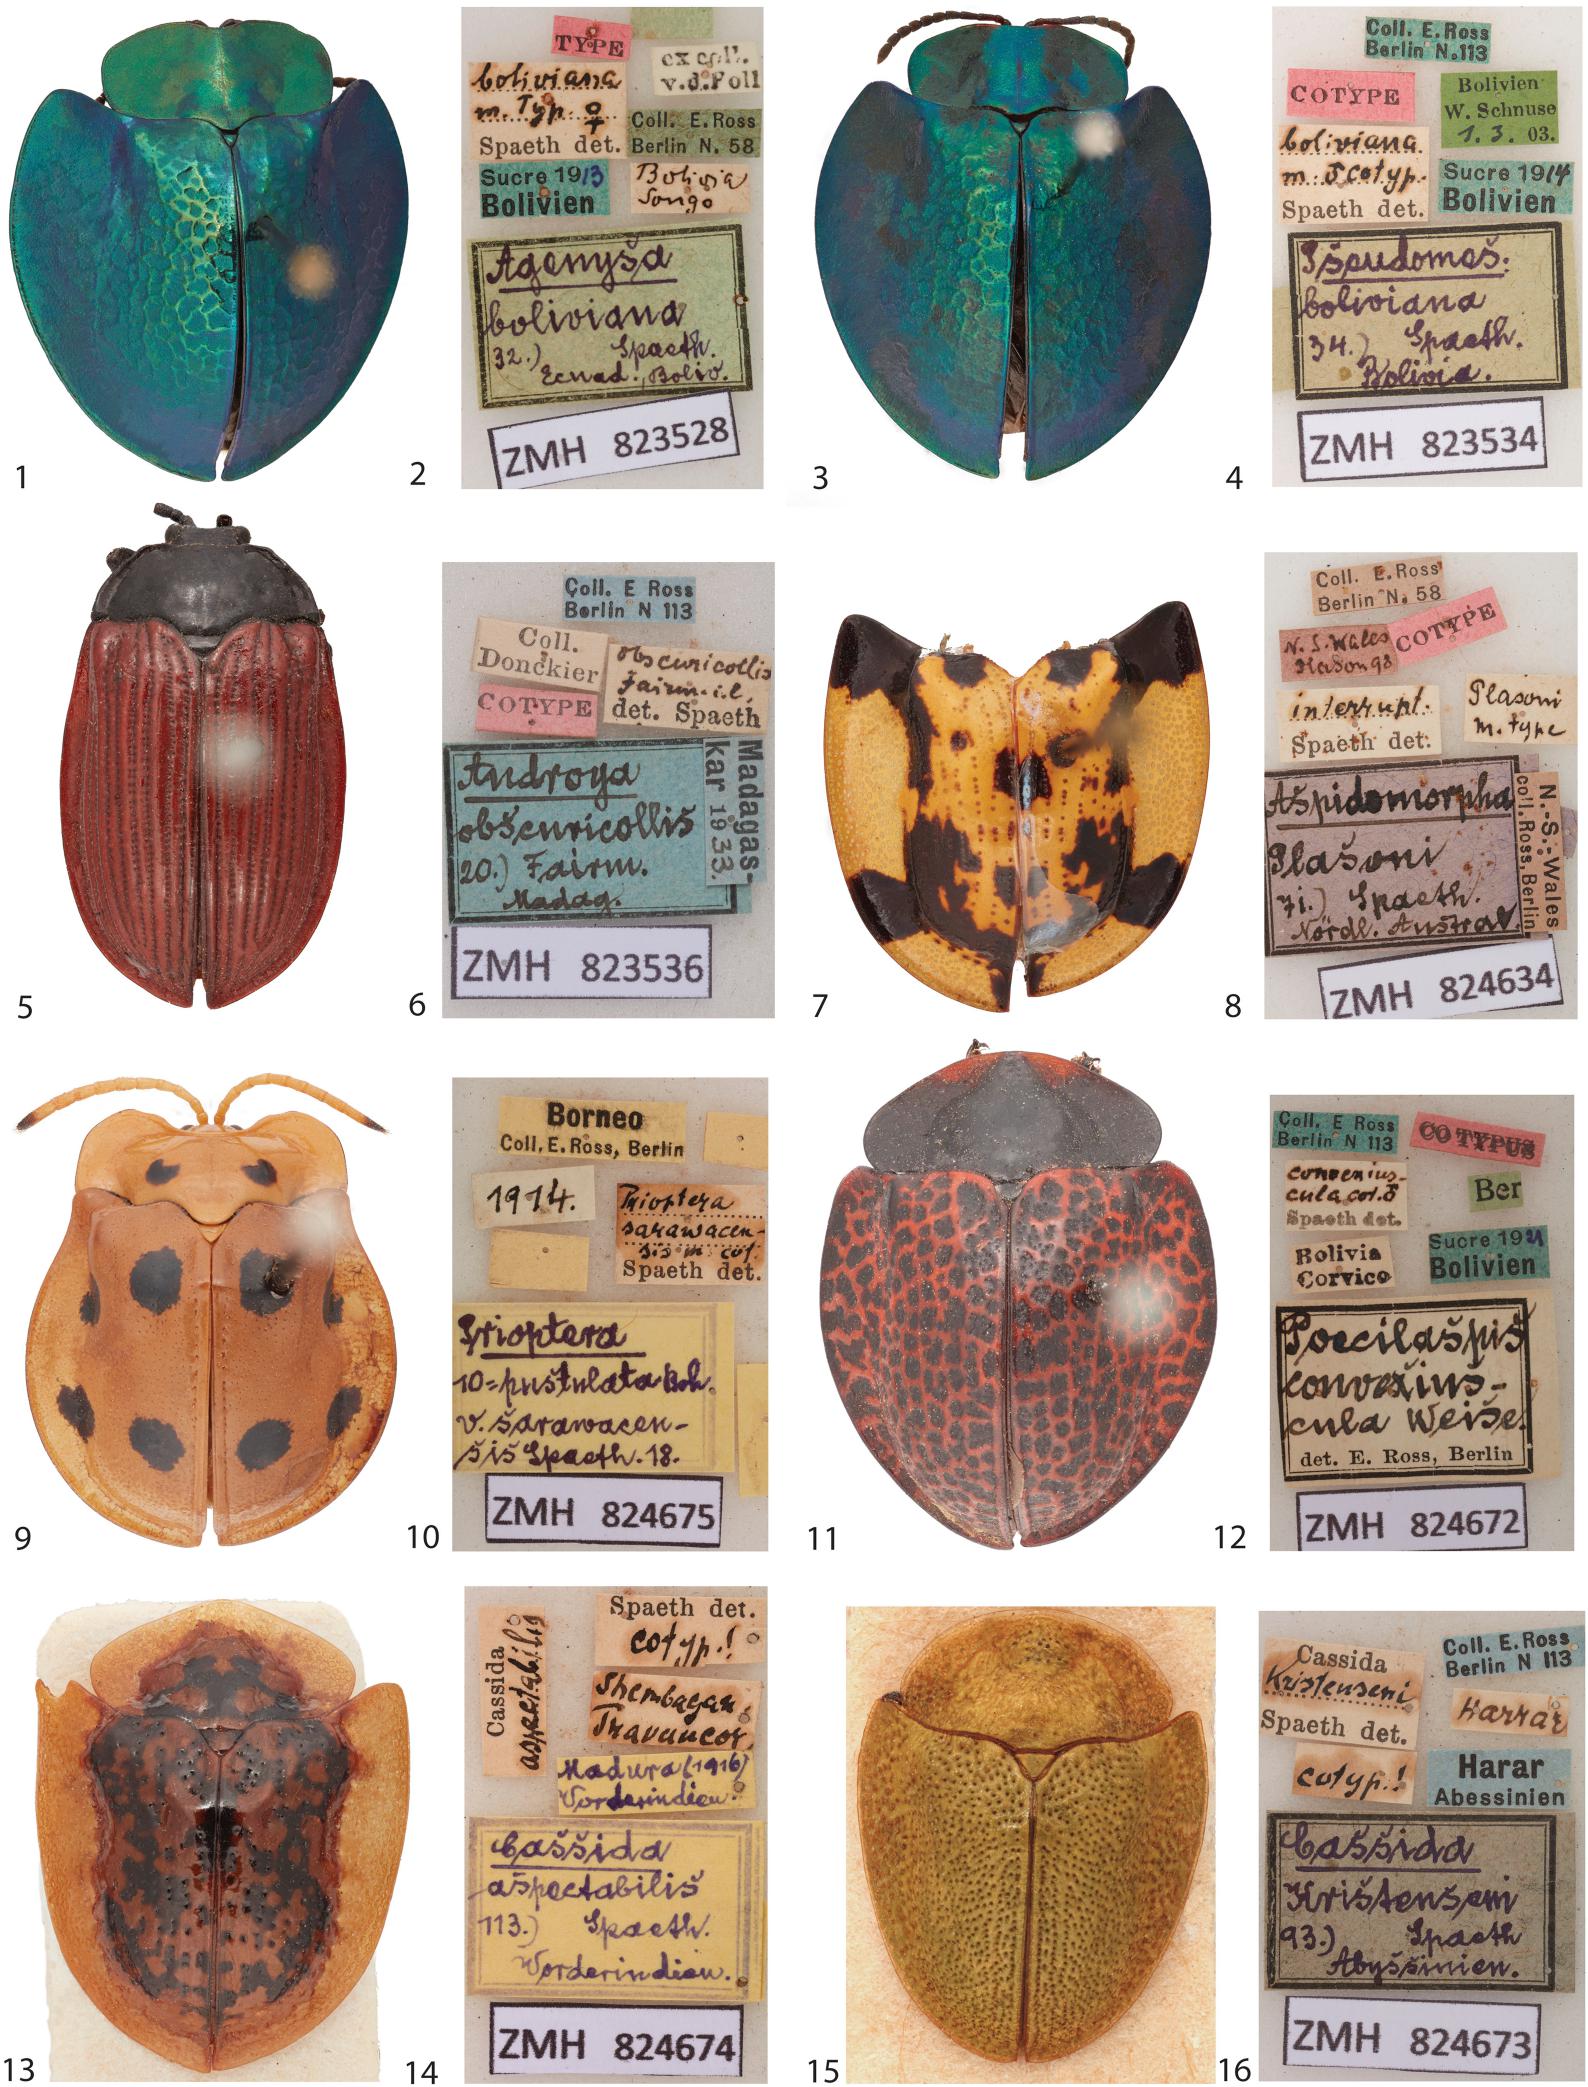 A Catalog of the Tortoise Beetle (Coleoptera Chrysomelidae Cassidinae) Collection Deposited in the Zoological Museum Hamburg (ZMH)